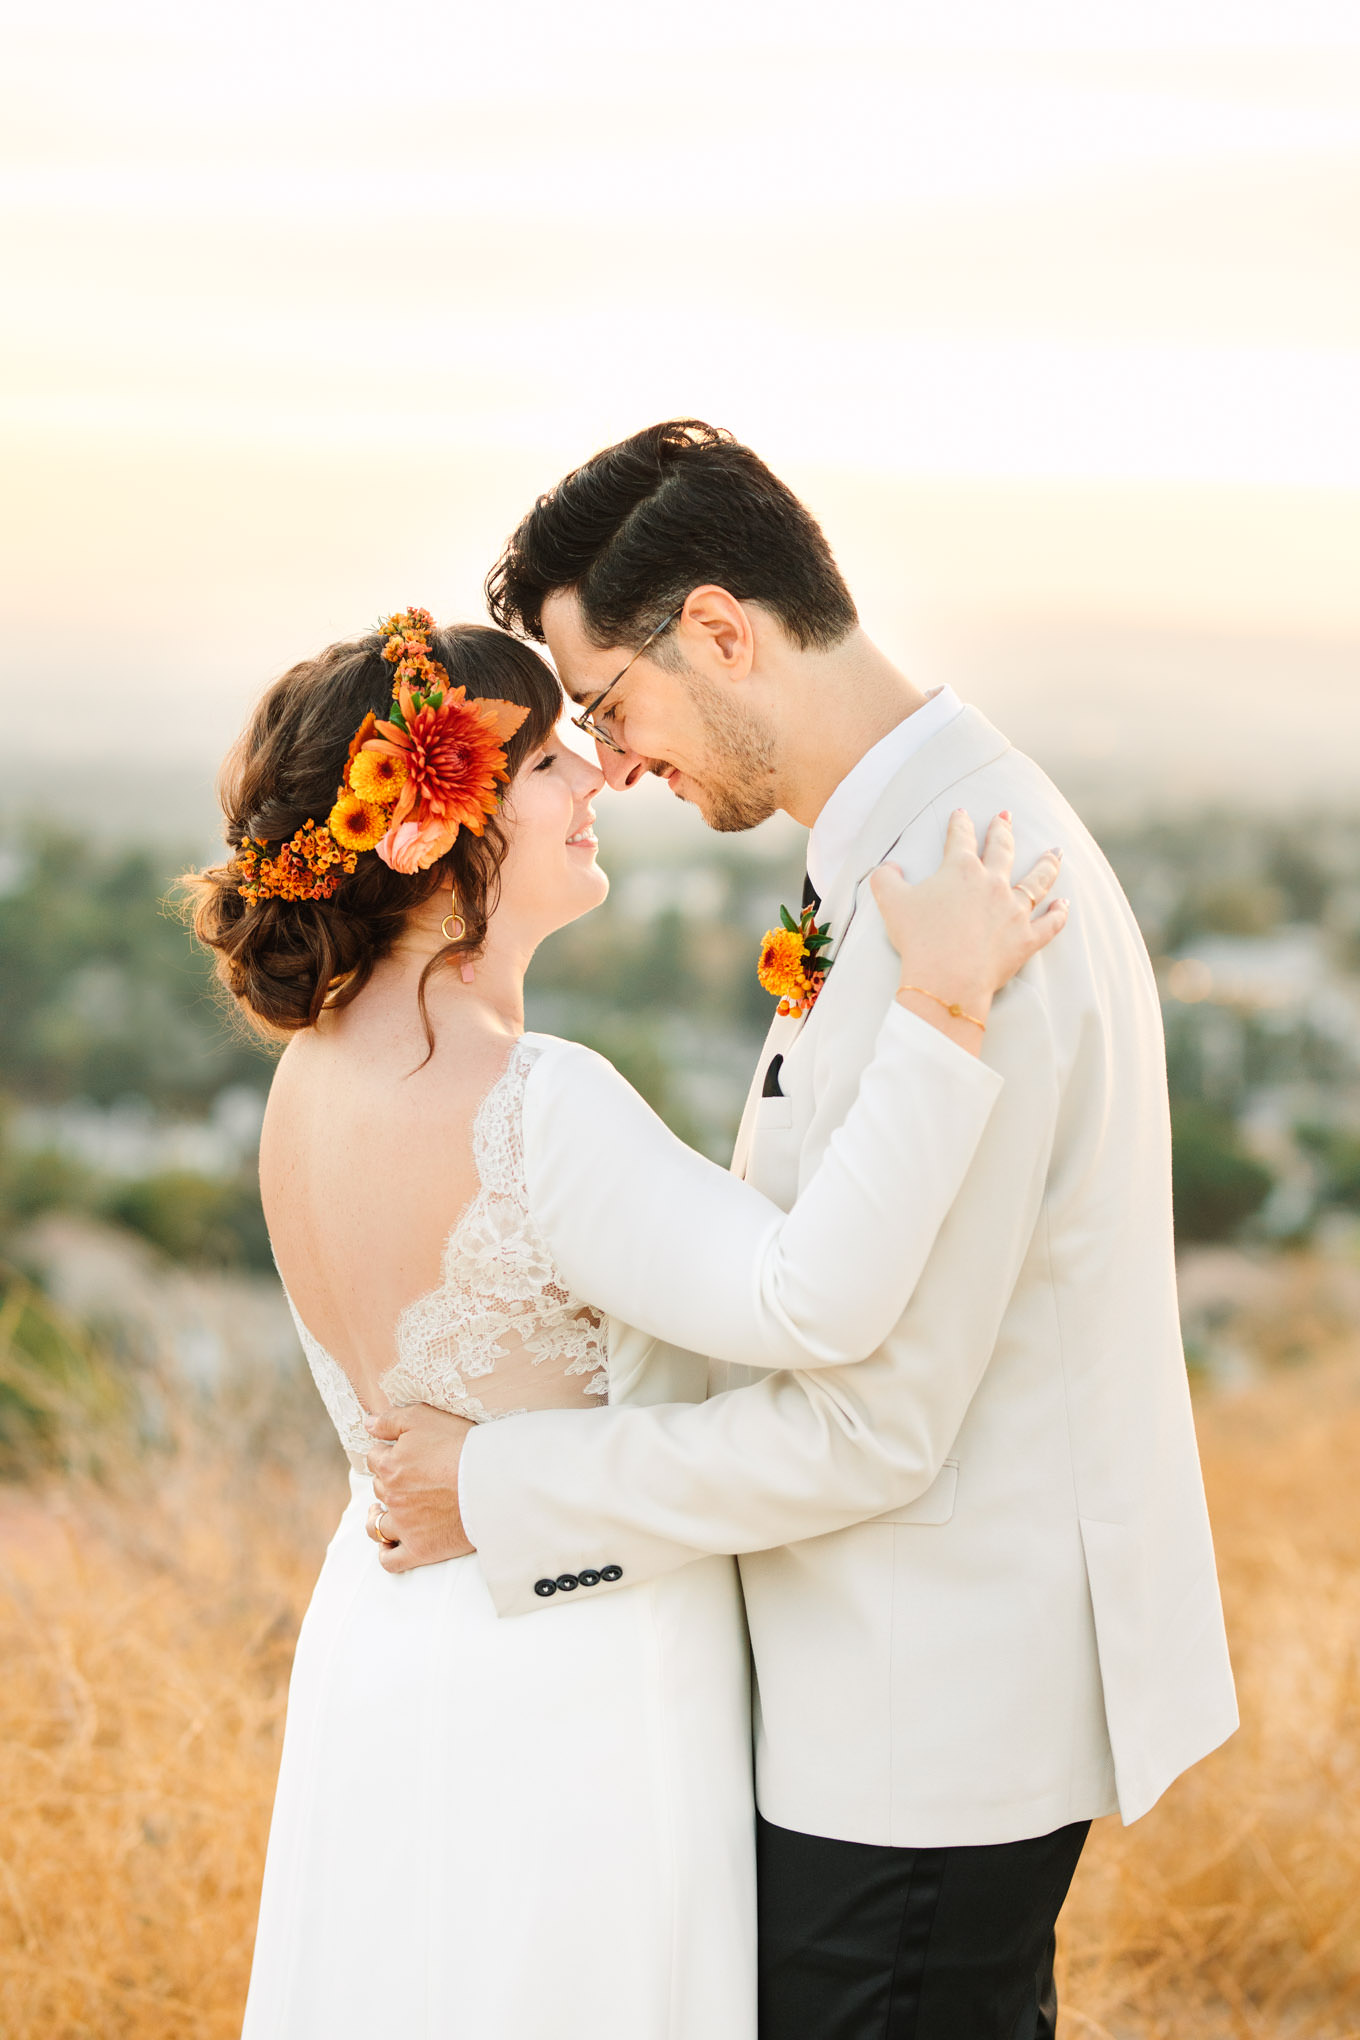 Bride and groom close up portrait face to face | Vibrant backyard micro wedding featured on Green Wedding Shoes | Colorful LA wedding photography | #losangeleswedding #backyardwedding #microwedding #laweddingphotographer Source: Mary Costa Photography | Los Angeles